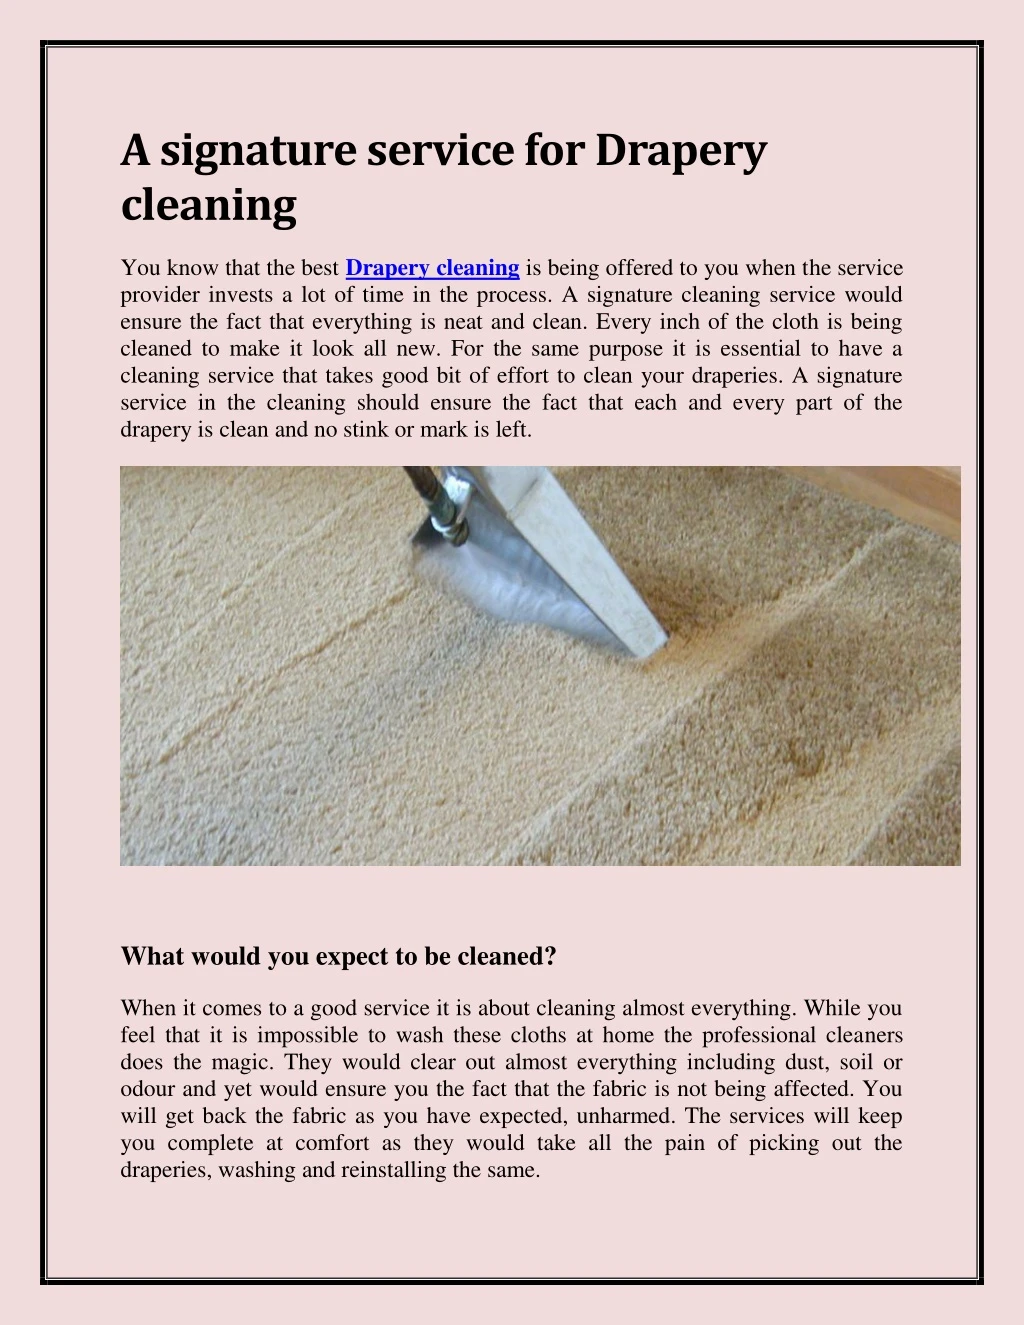 a signature service for drapery cleaning